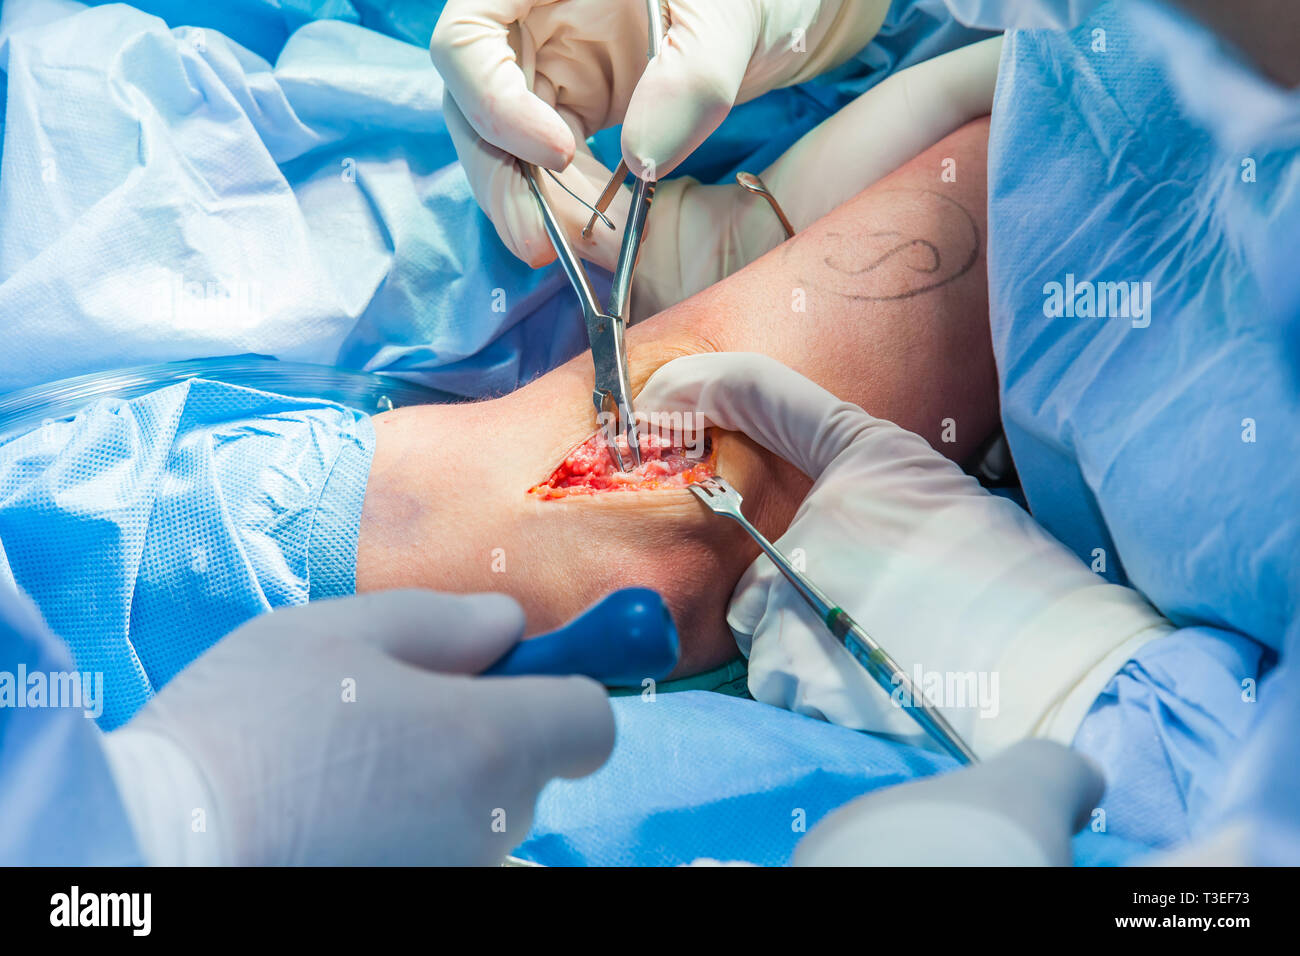 Group of orthopedic surgeons performing surgery on a patient arm Stock Photo